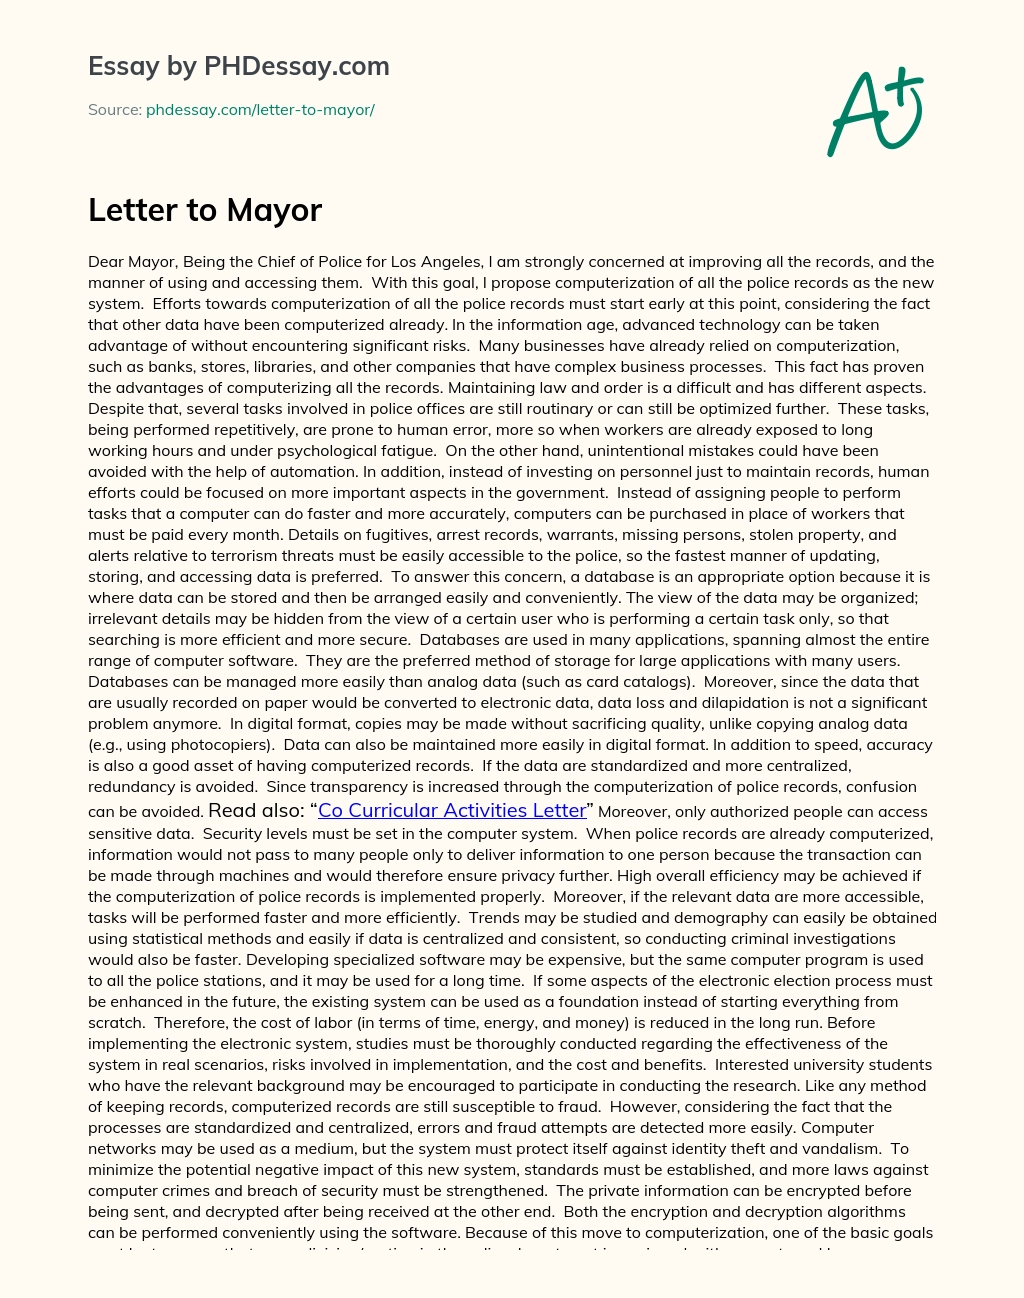 Letter to Mayor essay